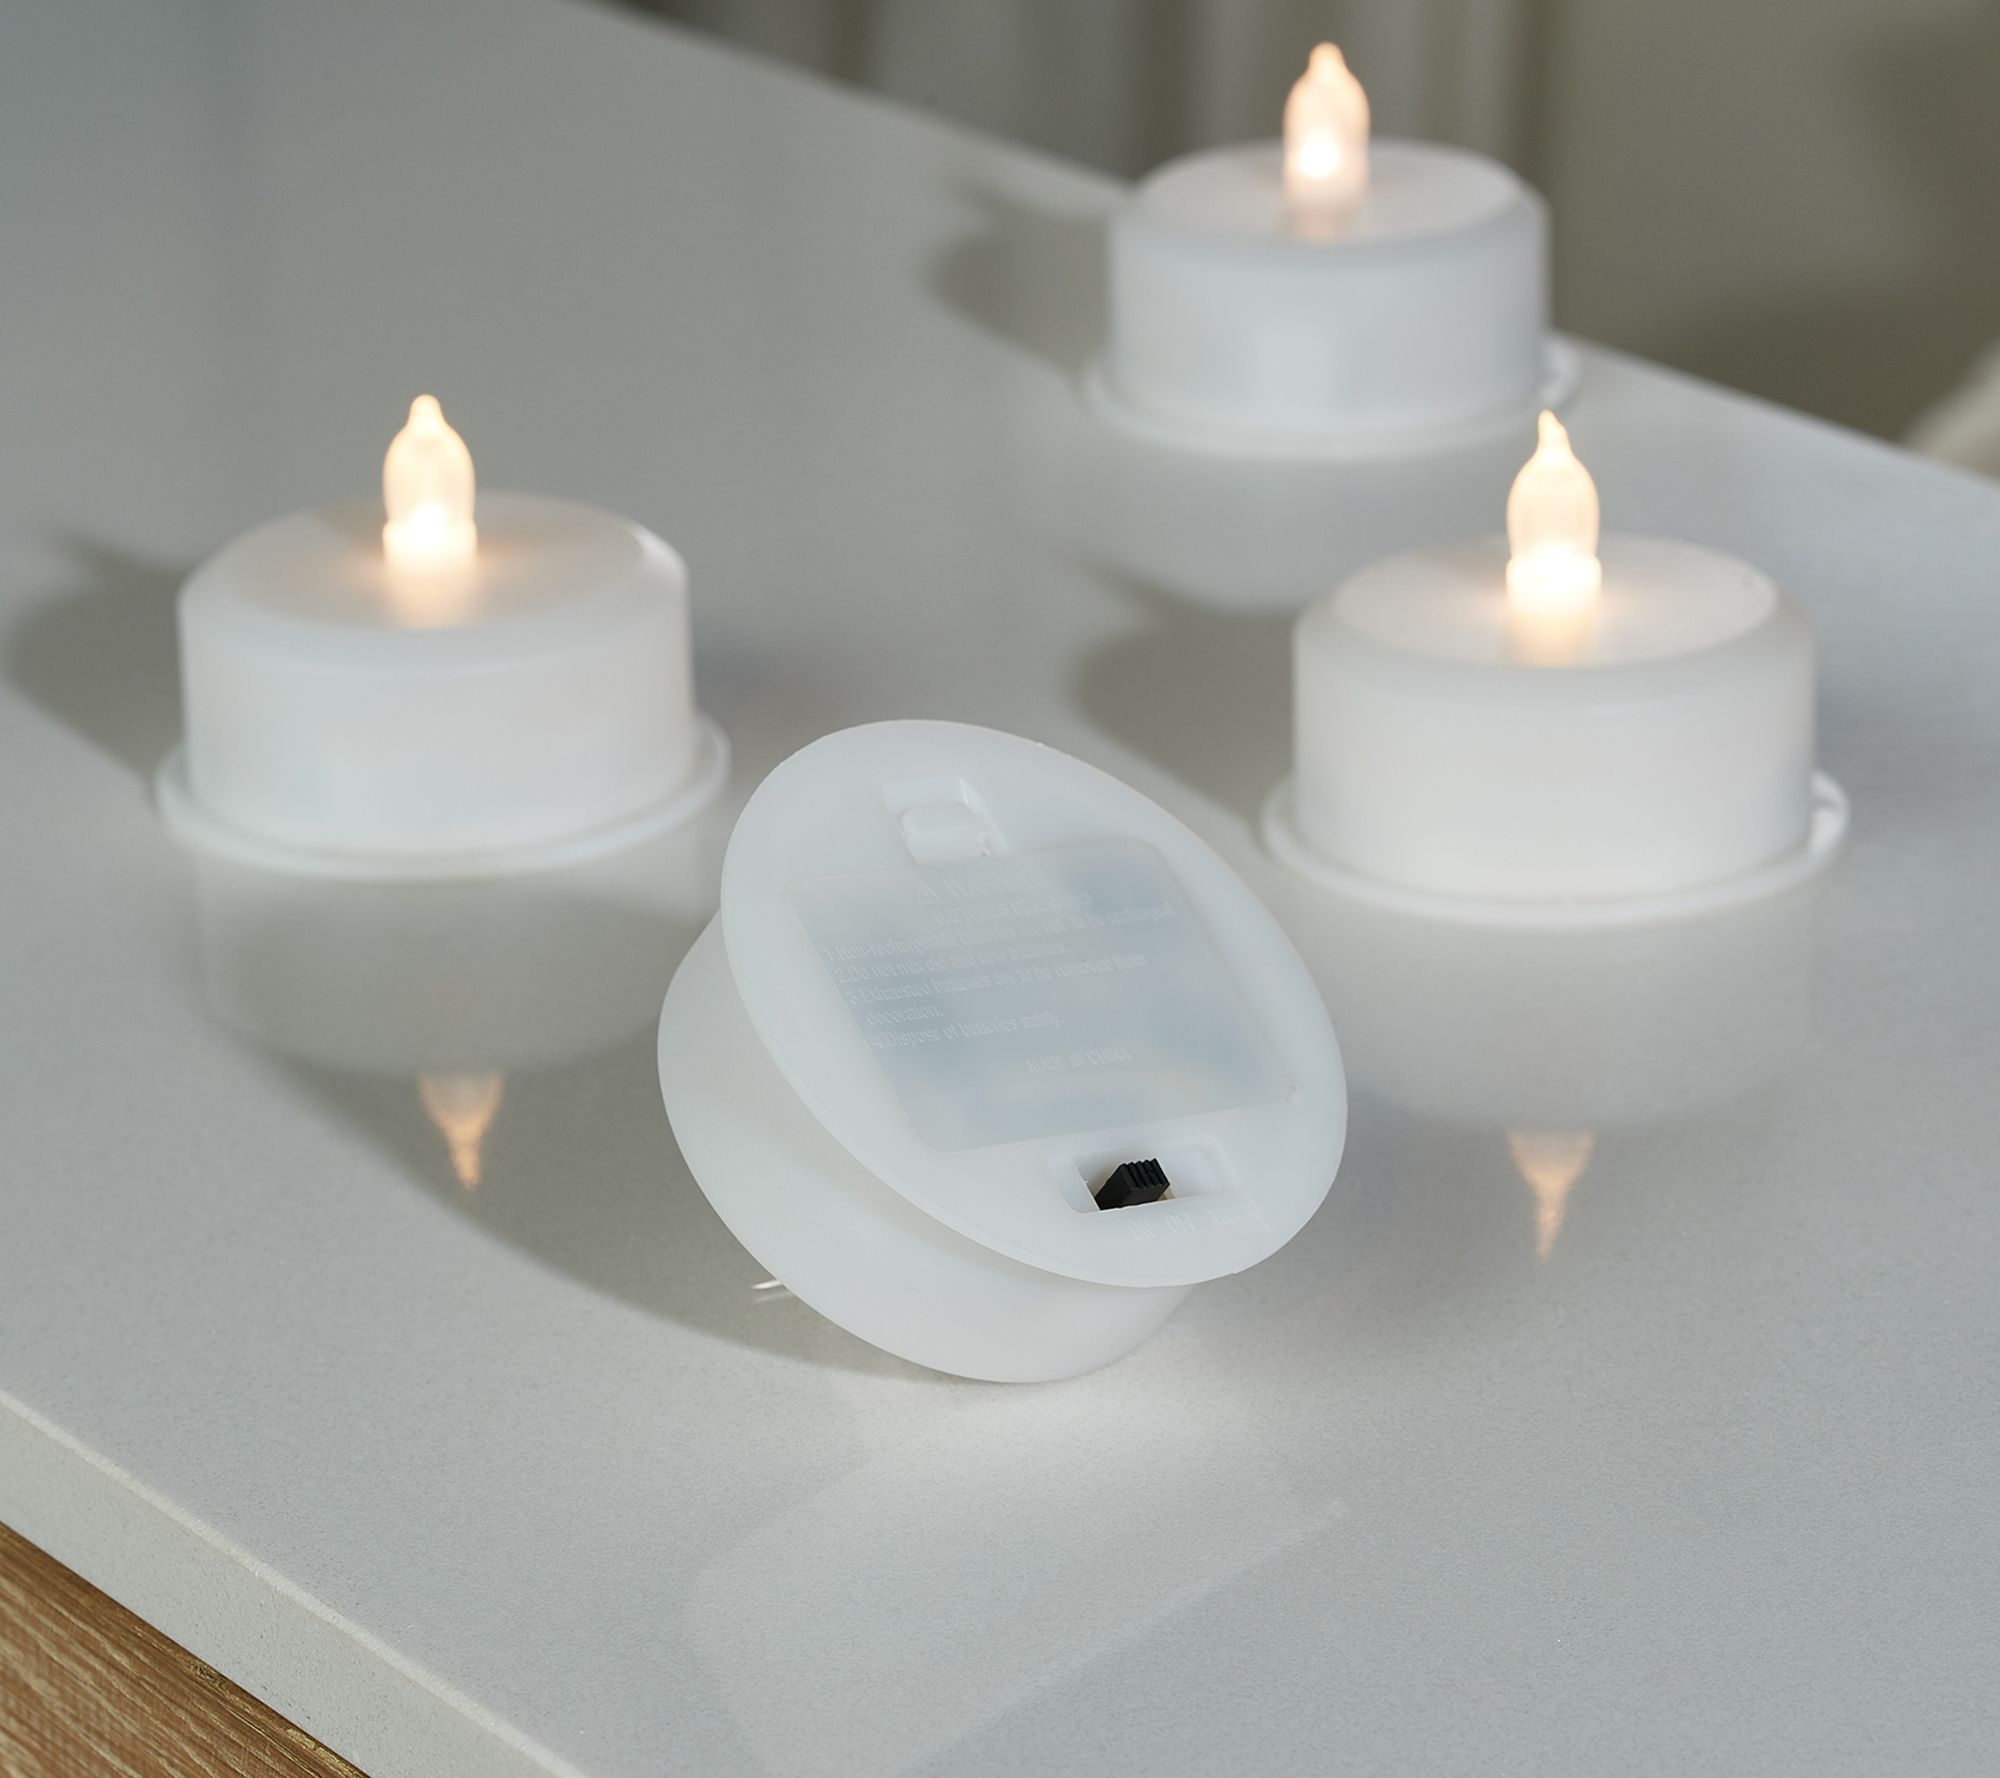 S/4 Battery Operated Tealights with Timer by Valerie - QVC.com